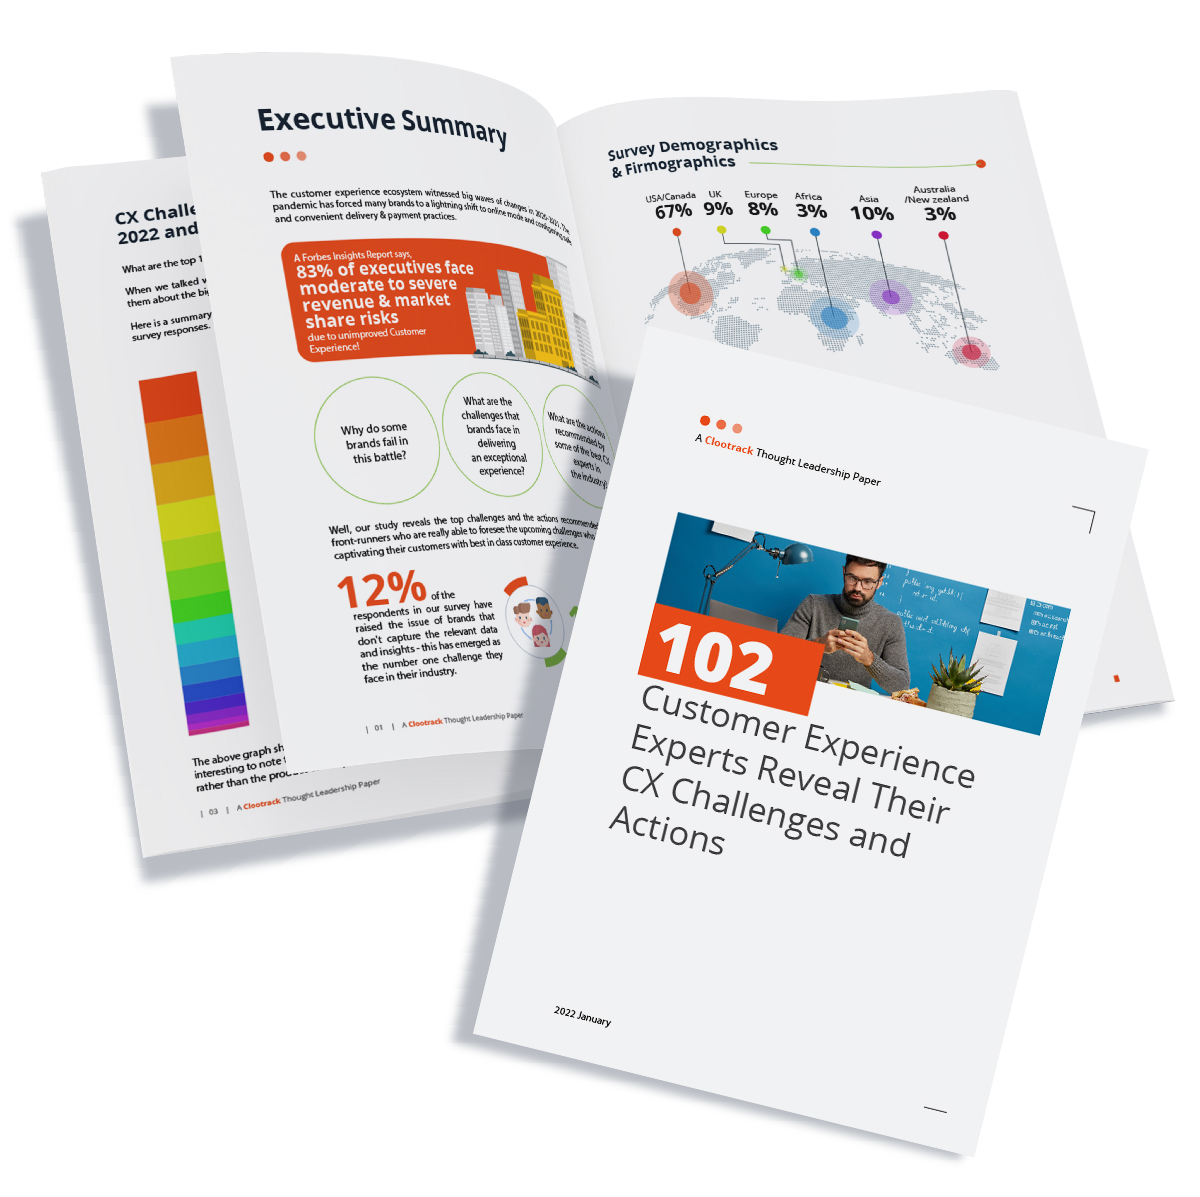 102 Customer Experience Experts Reveal Their CX Challenges and Actions Cover Image V2